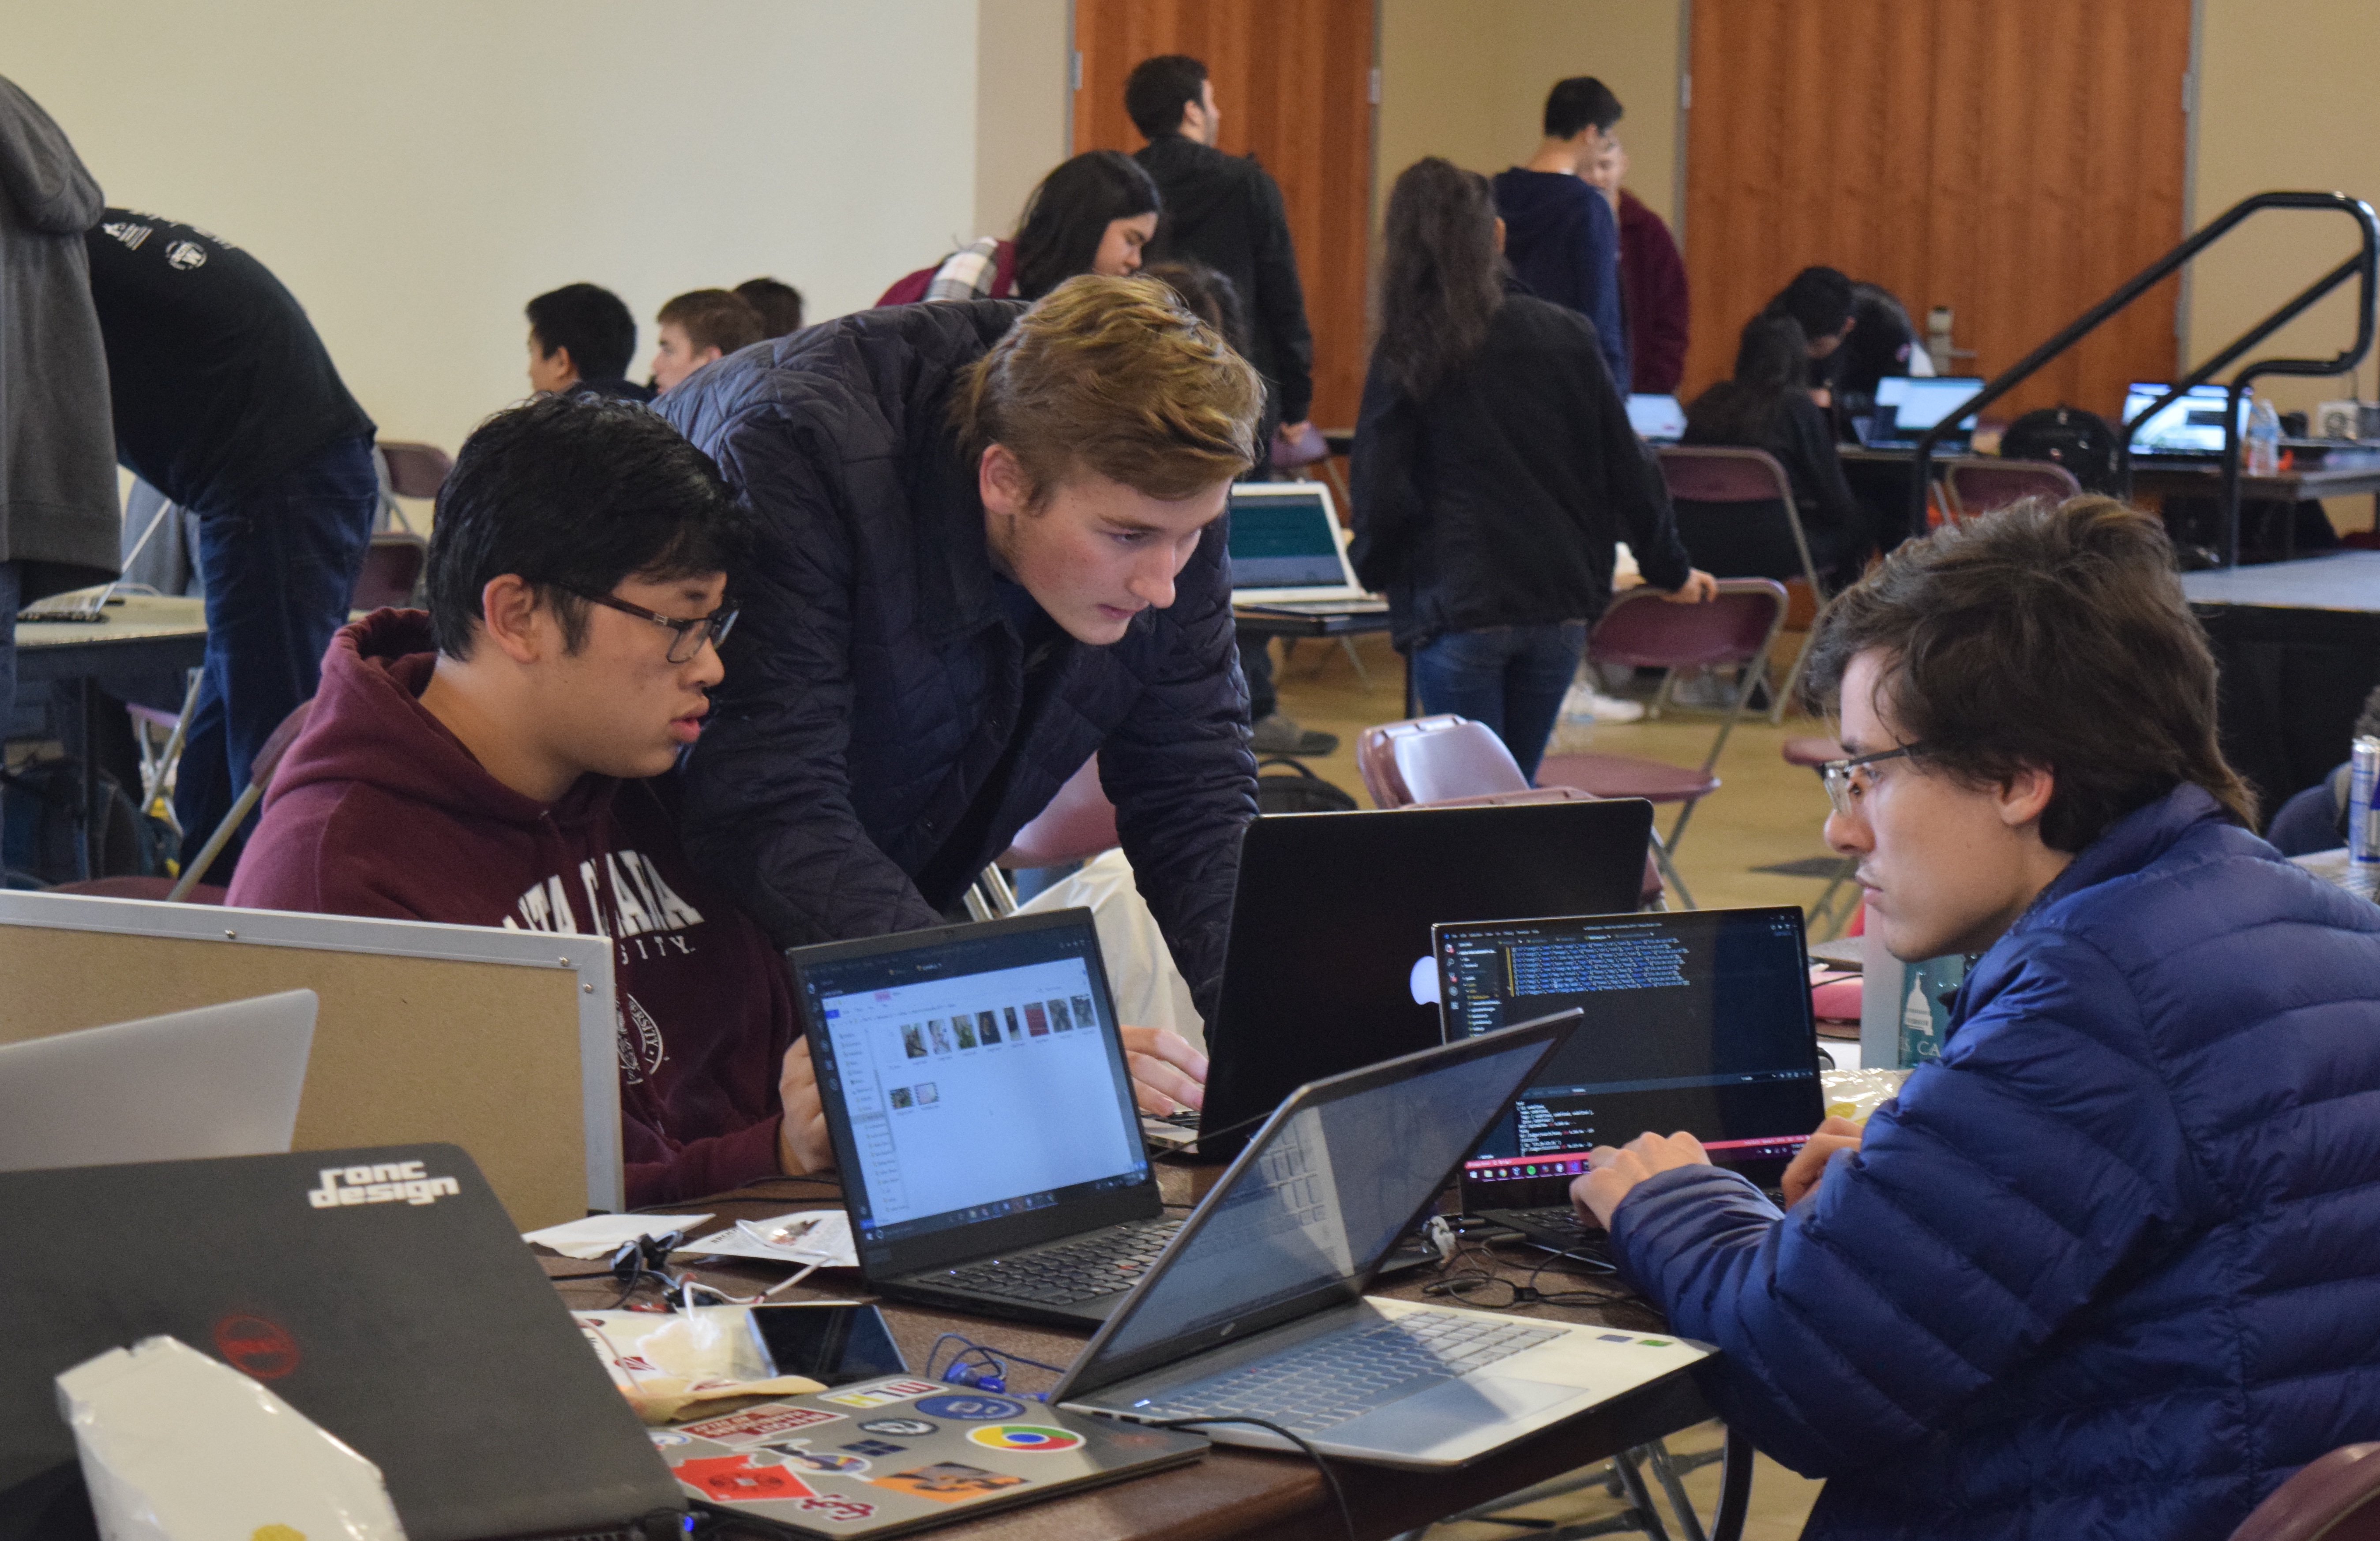 Hack For Humanity is ACM's annual hackathon for social good, which helps students develop real-world CS skills and experience